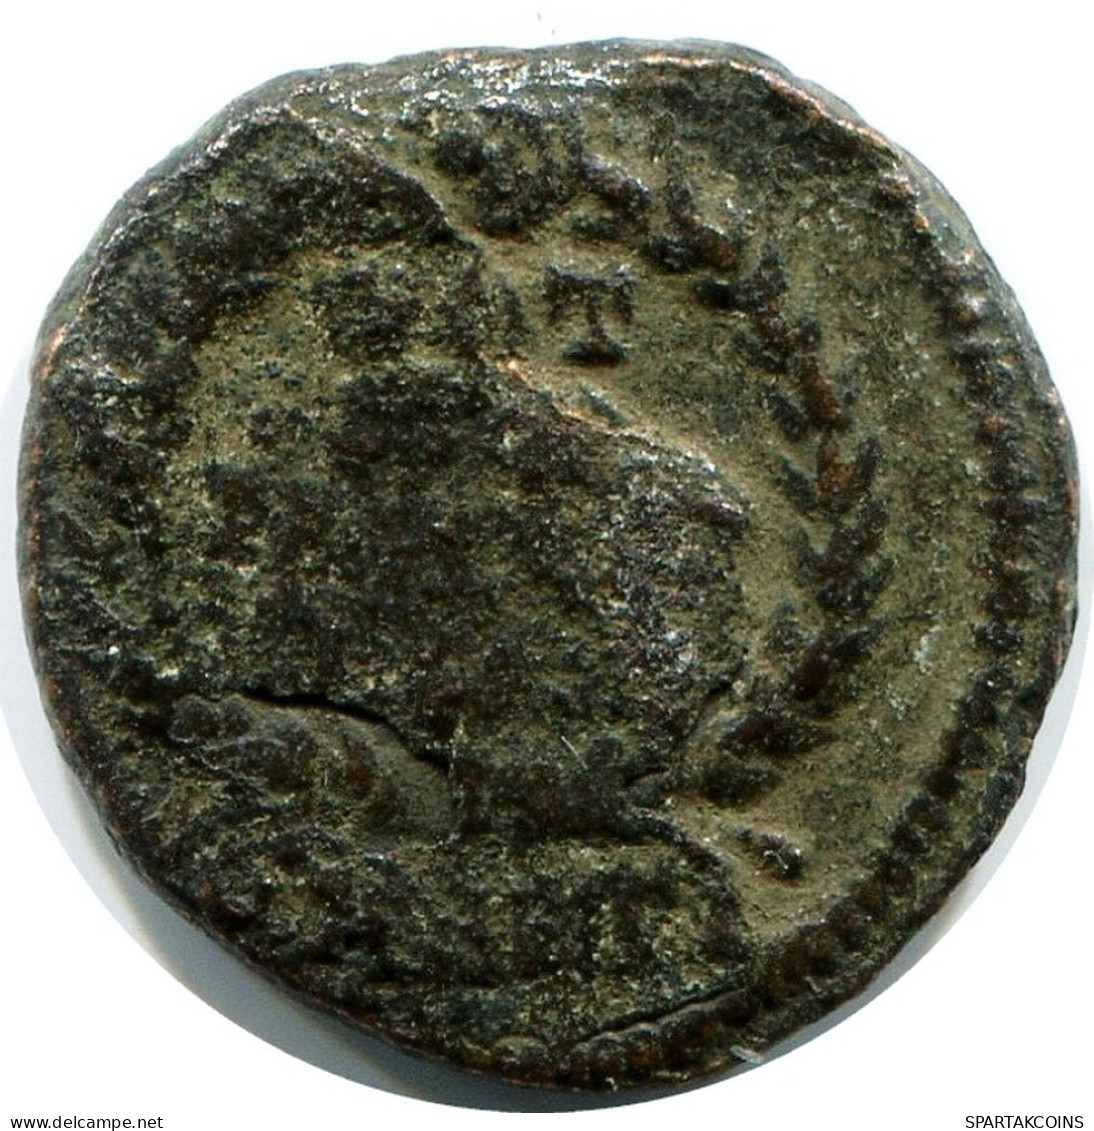 RÖMISCHE Münze MINTED IN ANTIOCH FOUND IN IHNASYAH HOARD EGYPT #ANC11312.14.D.A - The Christian Empire (307 AD Tot 363 AD)